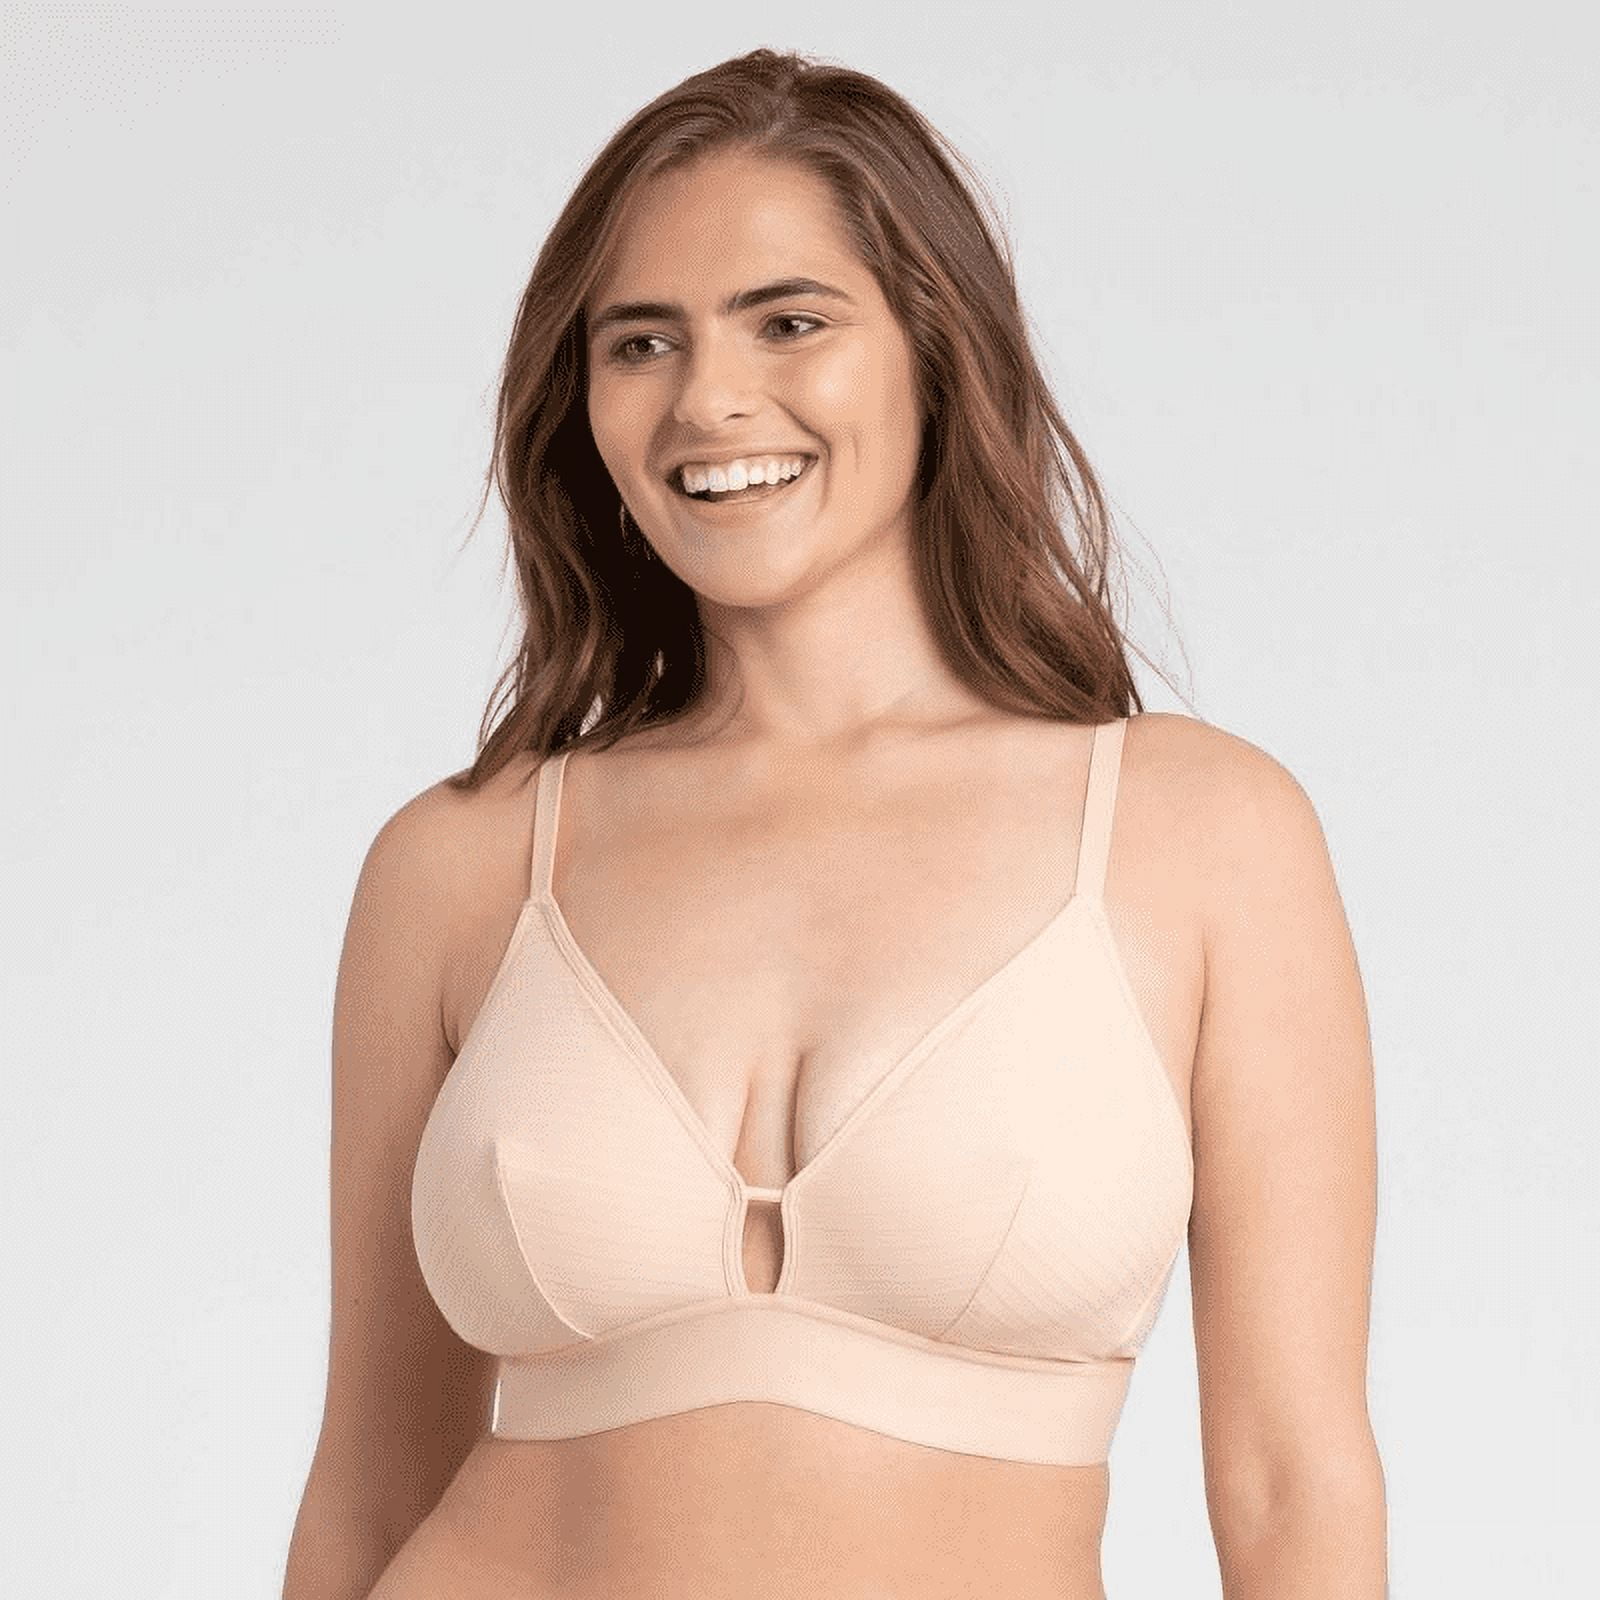 All.You. LIVELY Women's Busty Stripe Mesh Bralette - Size 1: 32DD-DDD, 34D-DD,  Toasted Almond 